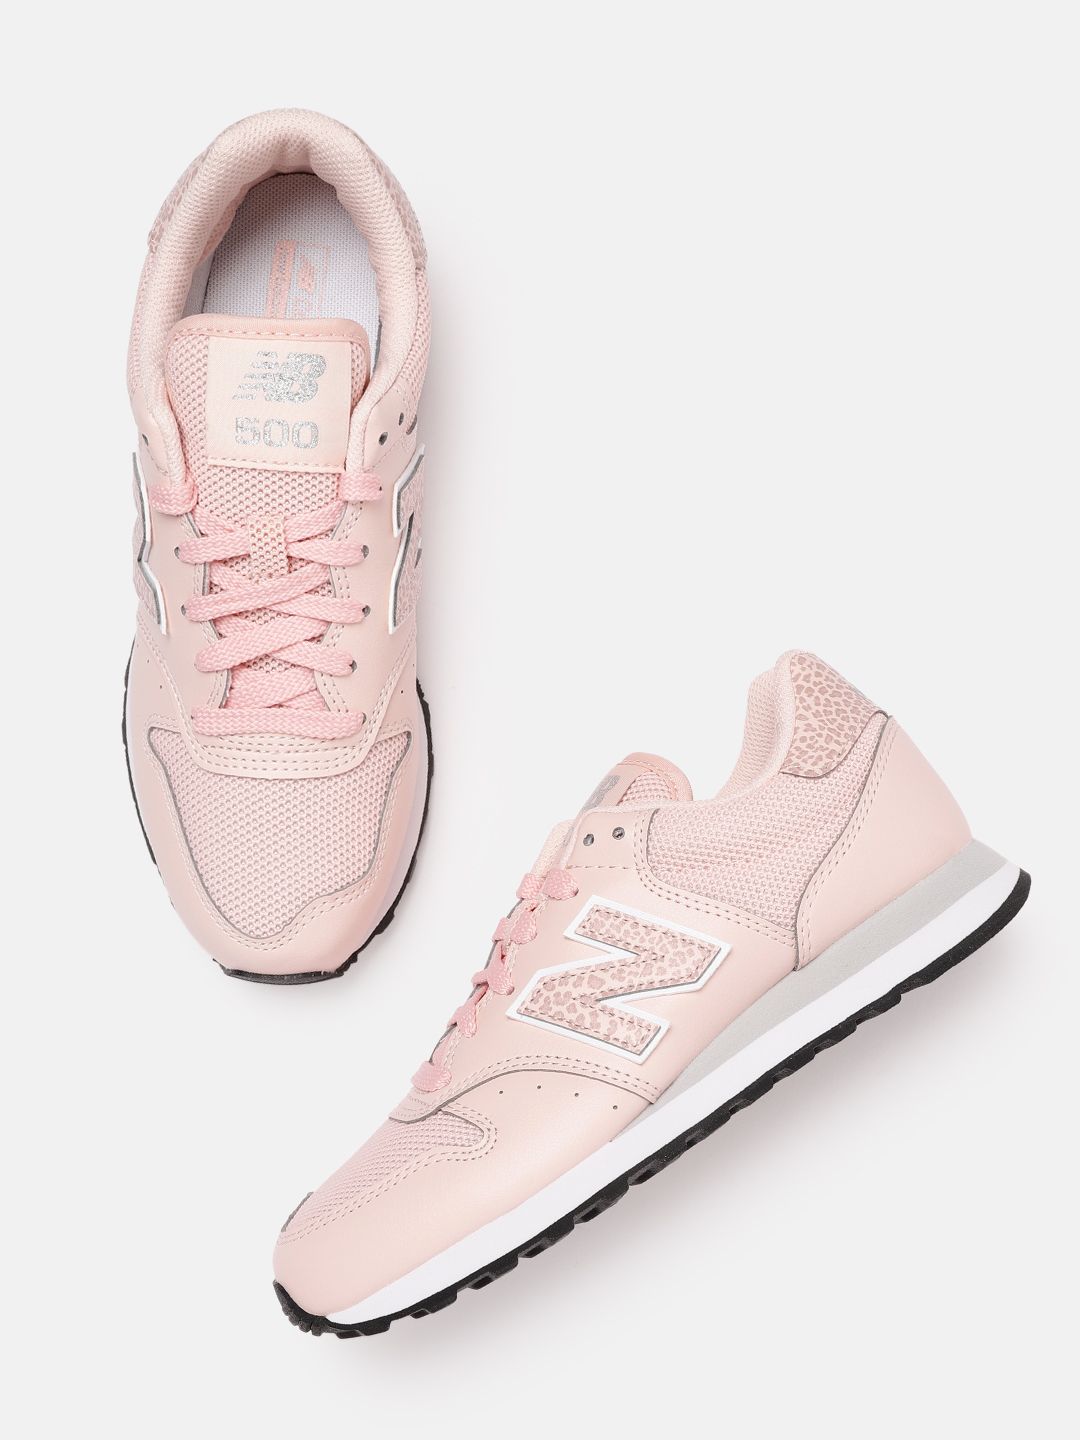 New Balance Women Peach-Coloured Woven Design Sneakers Price in India